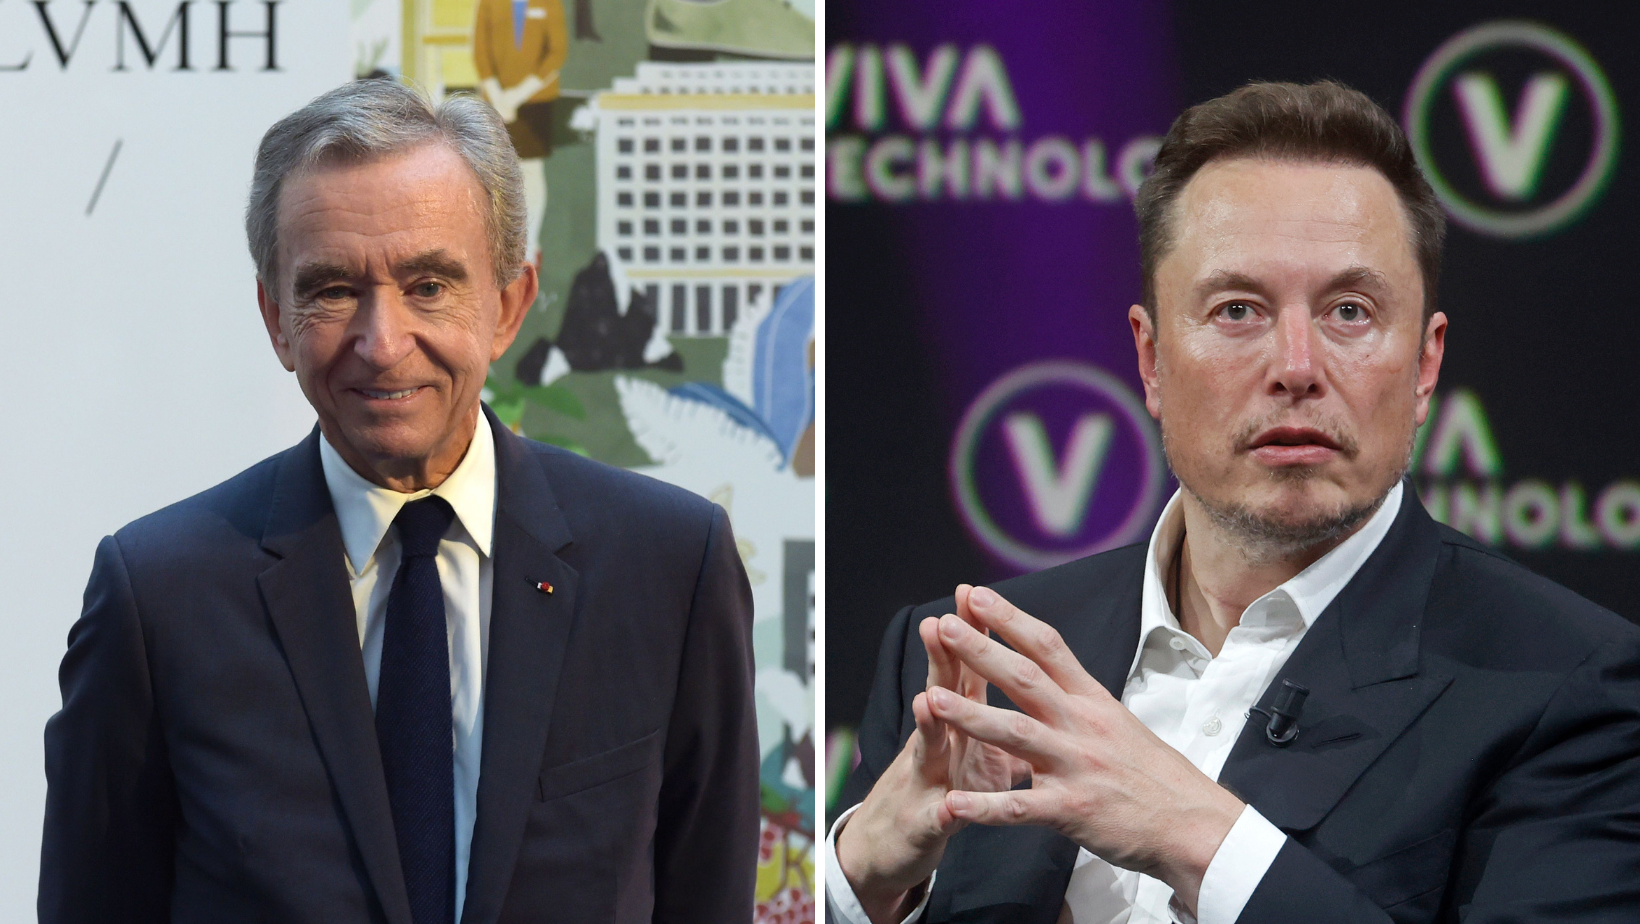 Bernard Arnault Lunches With Elon Musk at Paris' Cheval Blanc